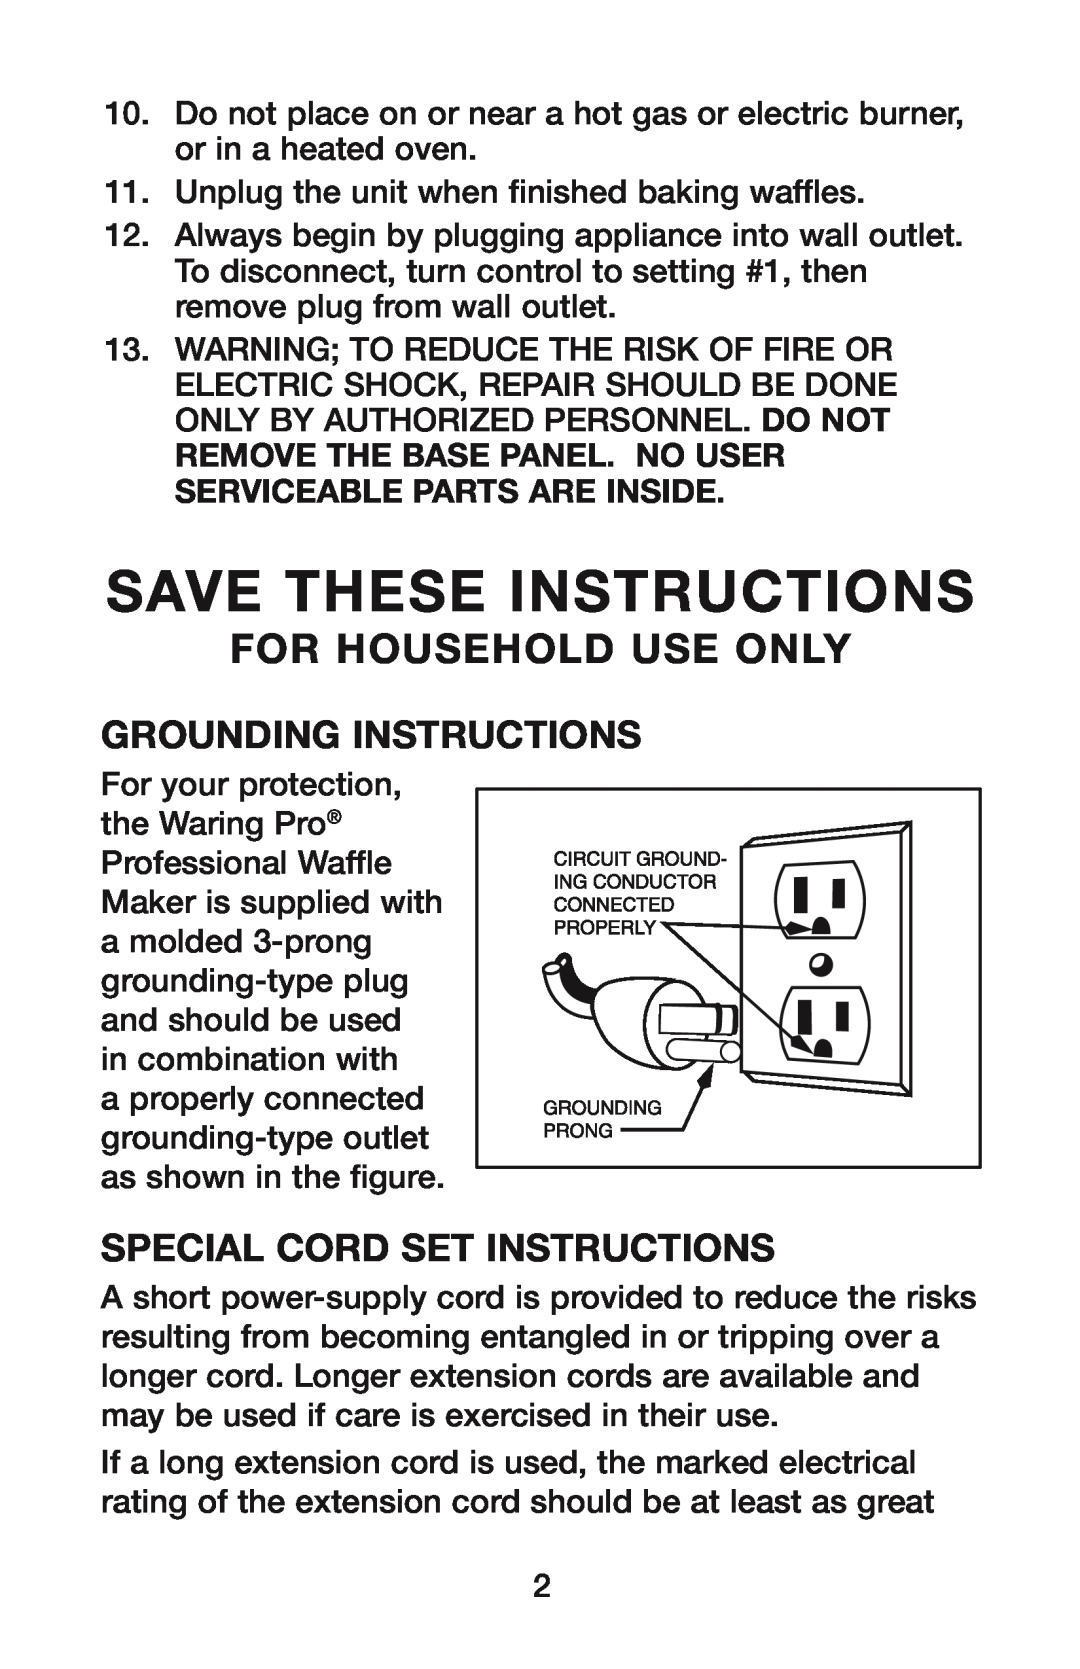 Waring IB8465 manual Save These Instructions, Grounding Instructions, Special Cord Set Instructions, For Household Use Only 